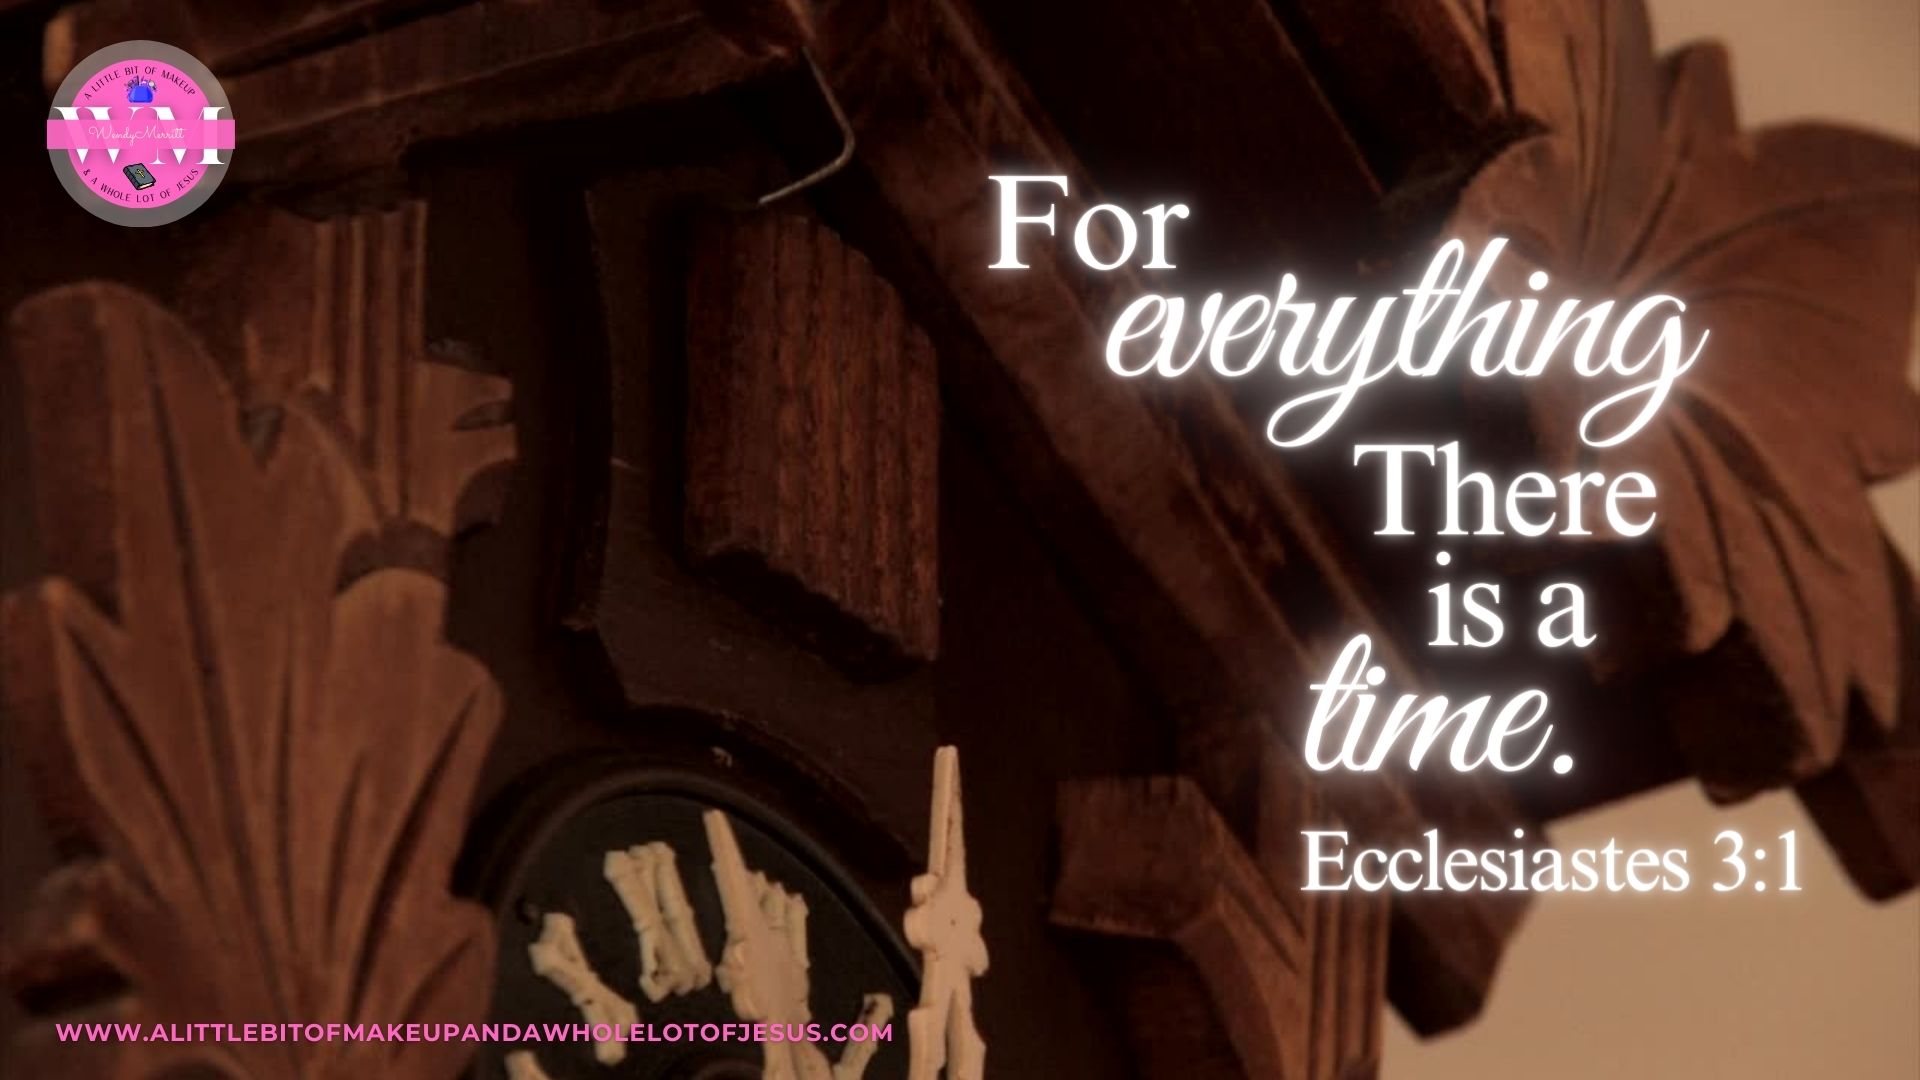 Graphics: For everything there is a time.  Ecclesiastes 3:1 Season 1: Episode 43